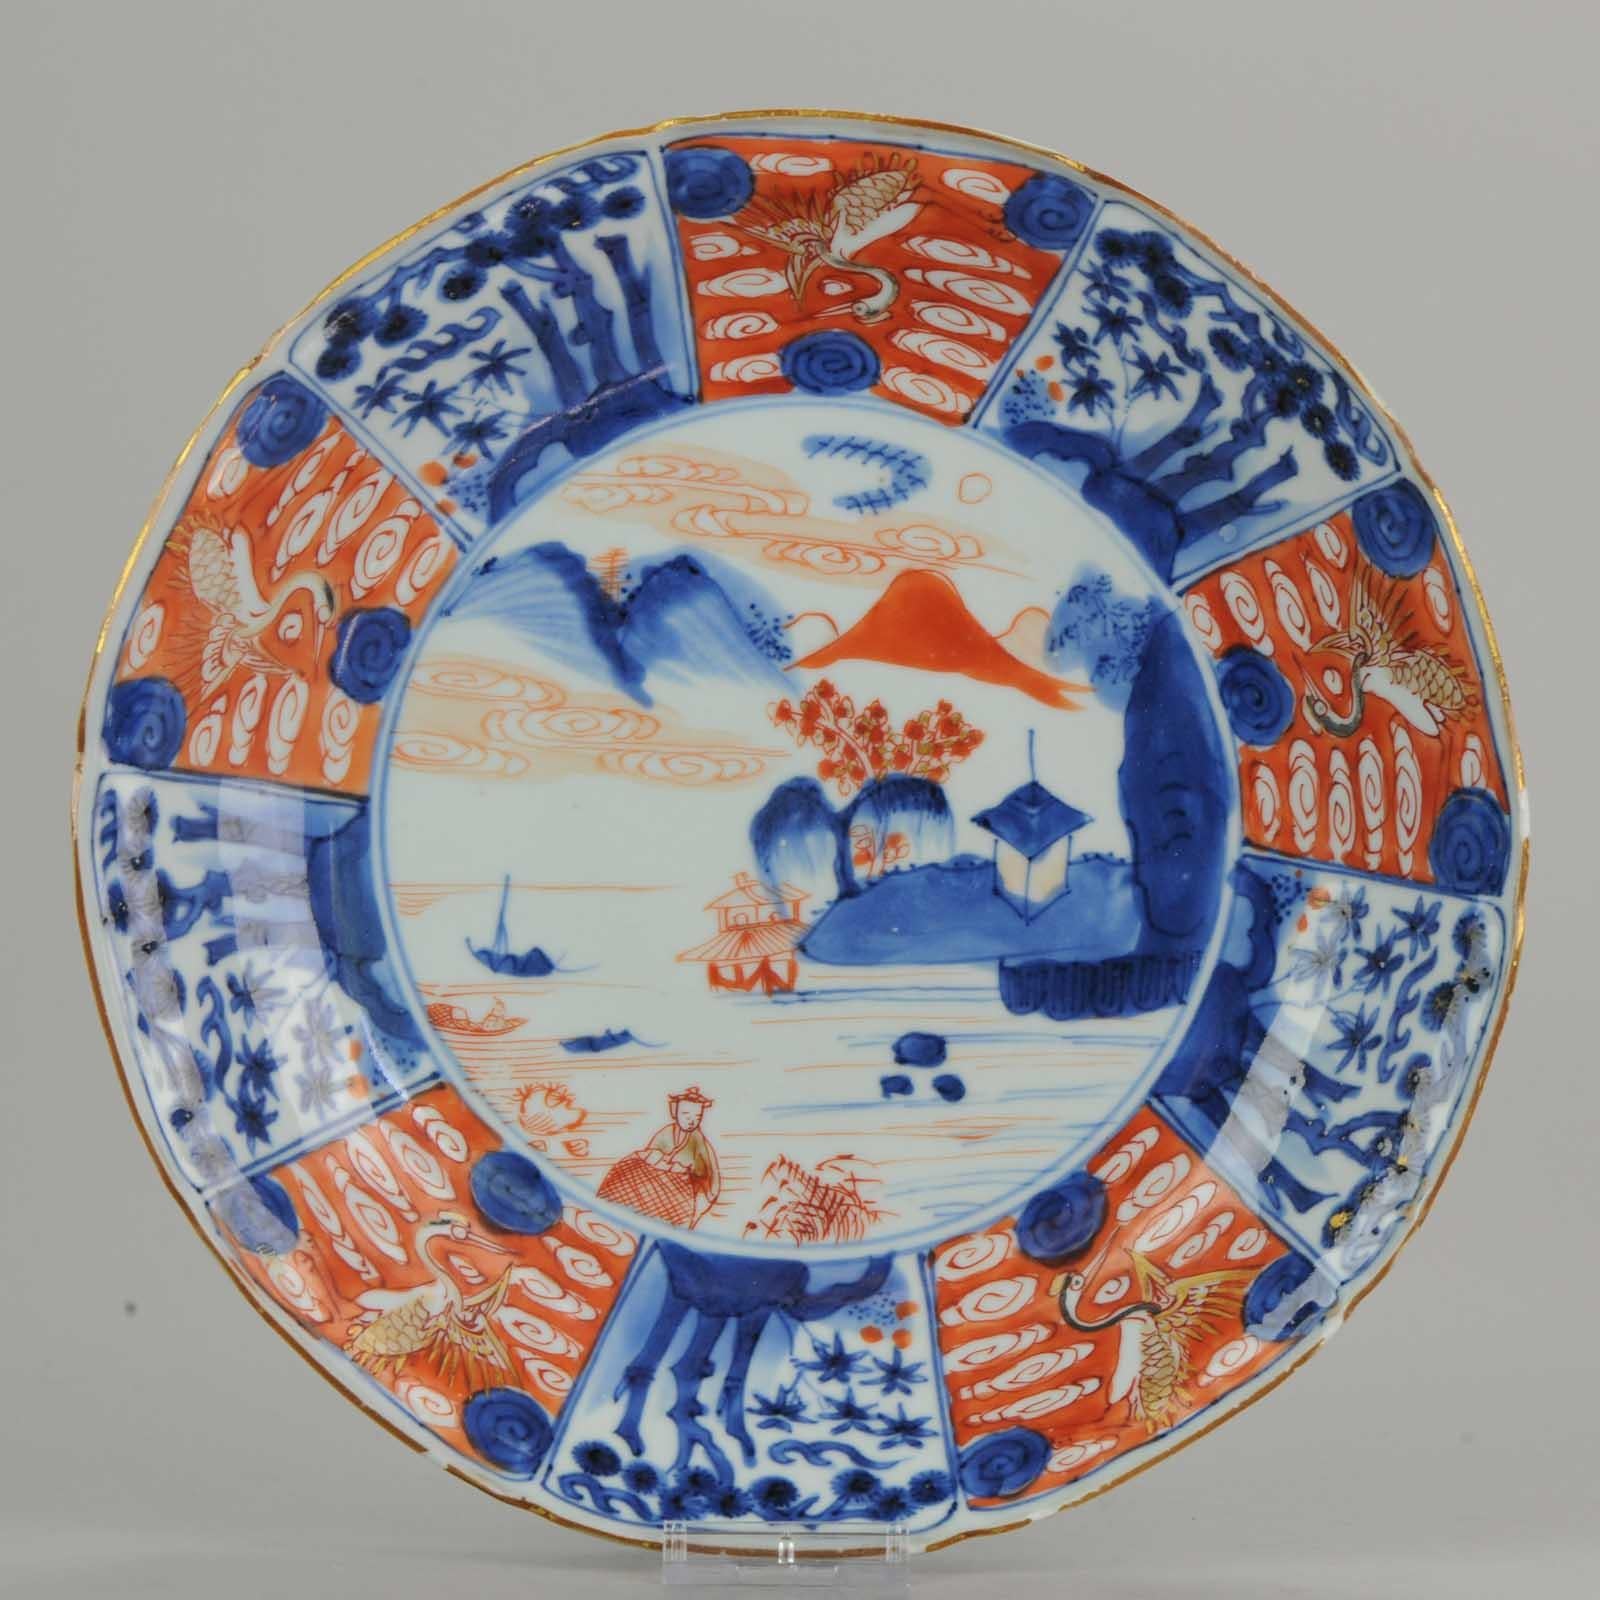 Lovely early Kangxi period chinese porcelain plate. Great style of painting. Very high quality.

Lovely Japanese Arita porcelain plate. Great style of painting. Very high quality.

Additional information:
Material: Porcelain 
Region of Origin: